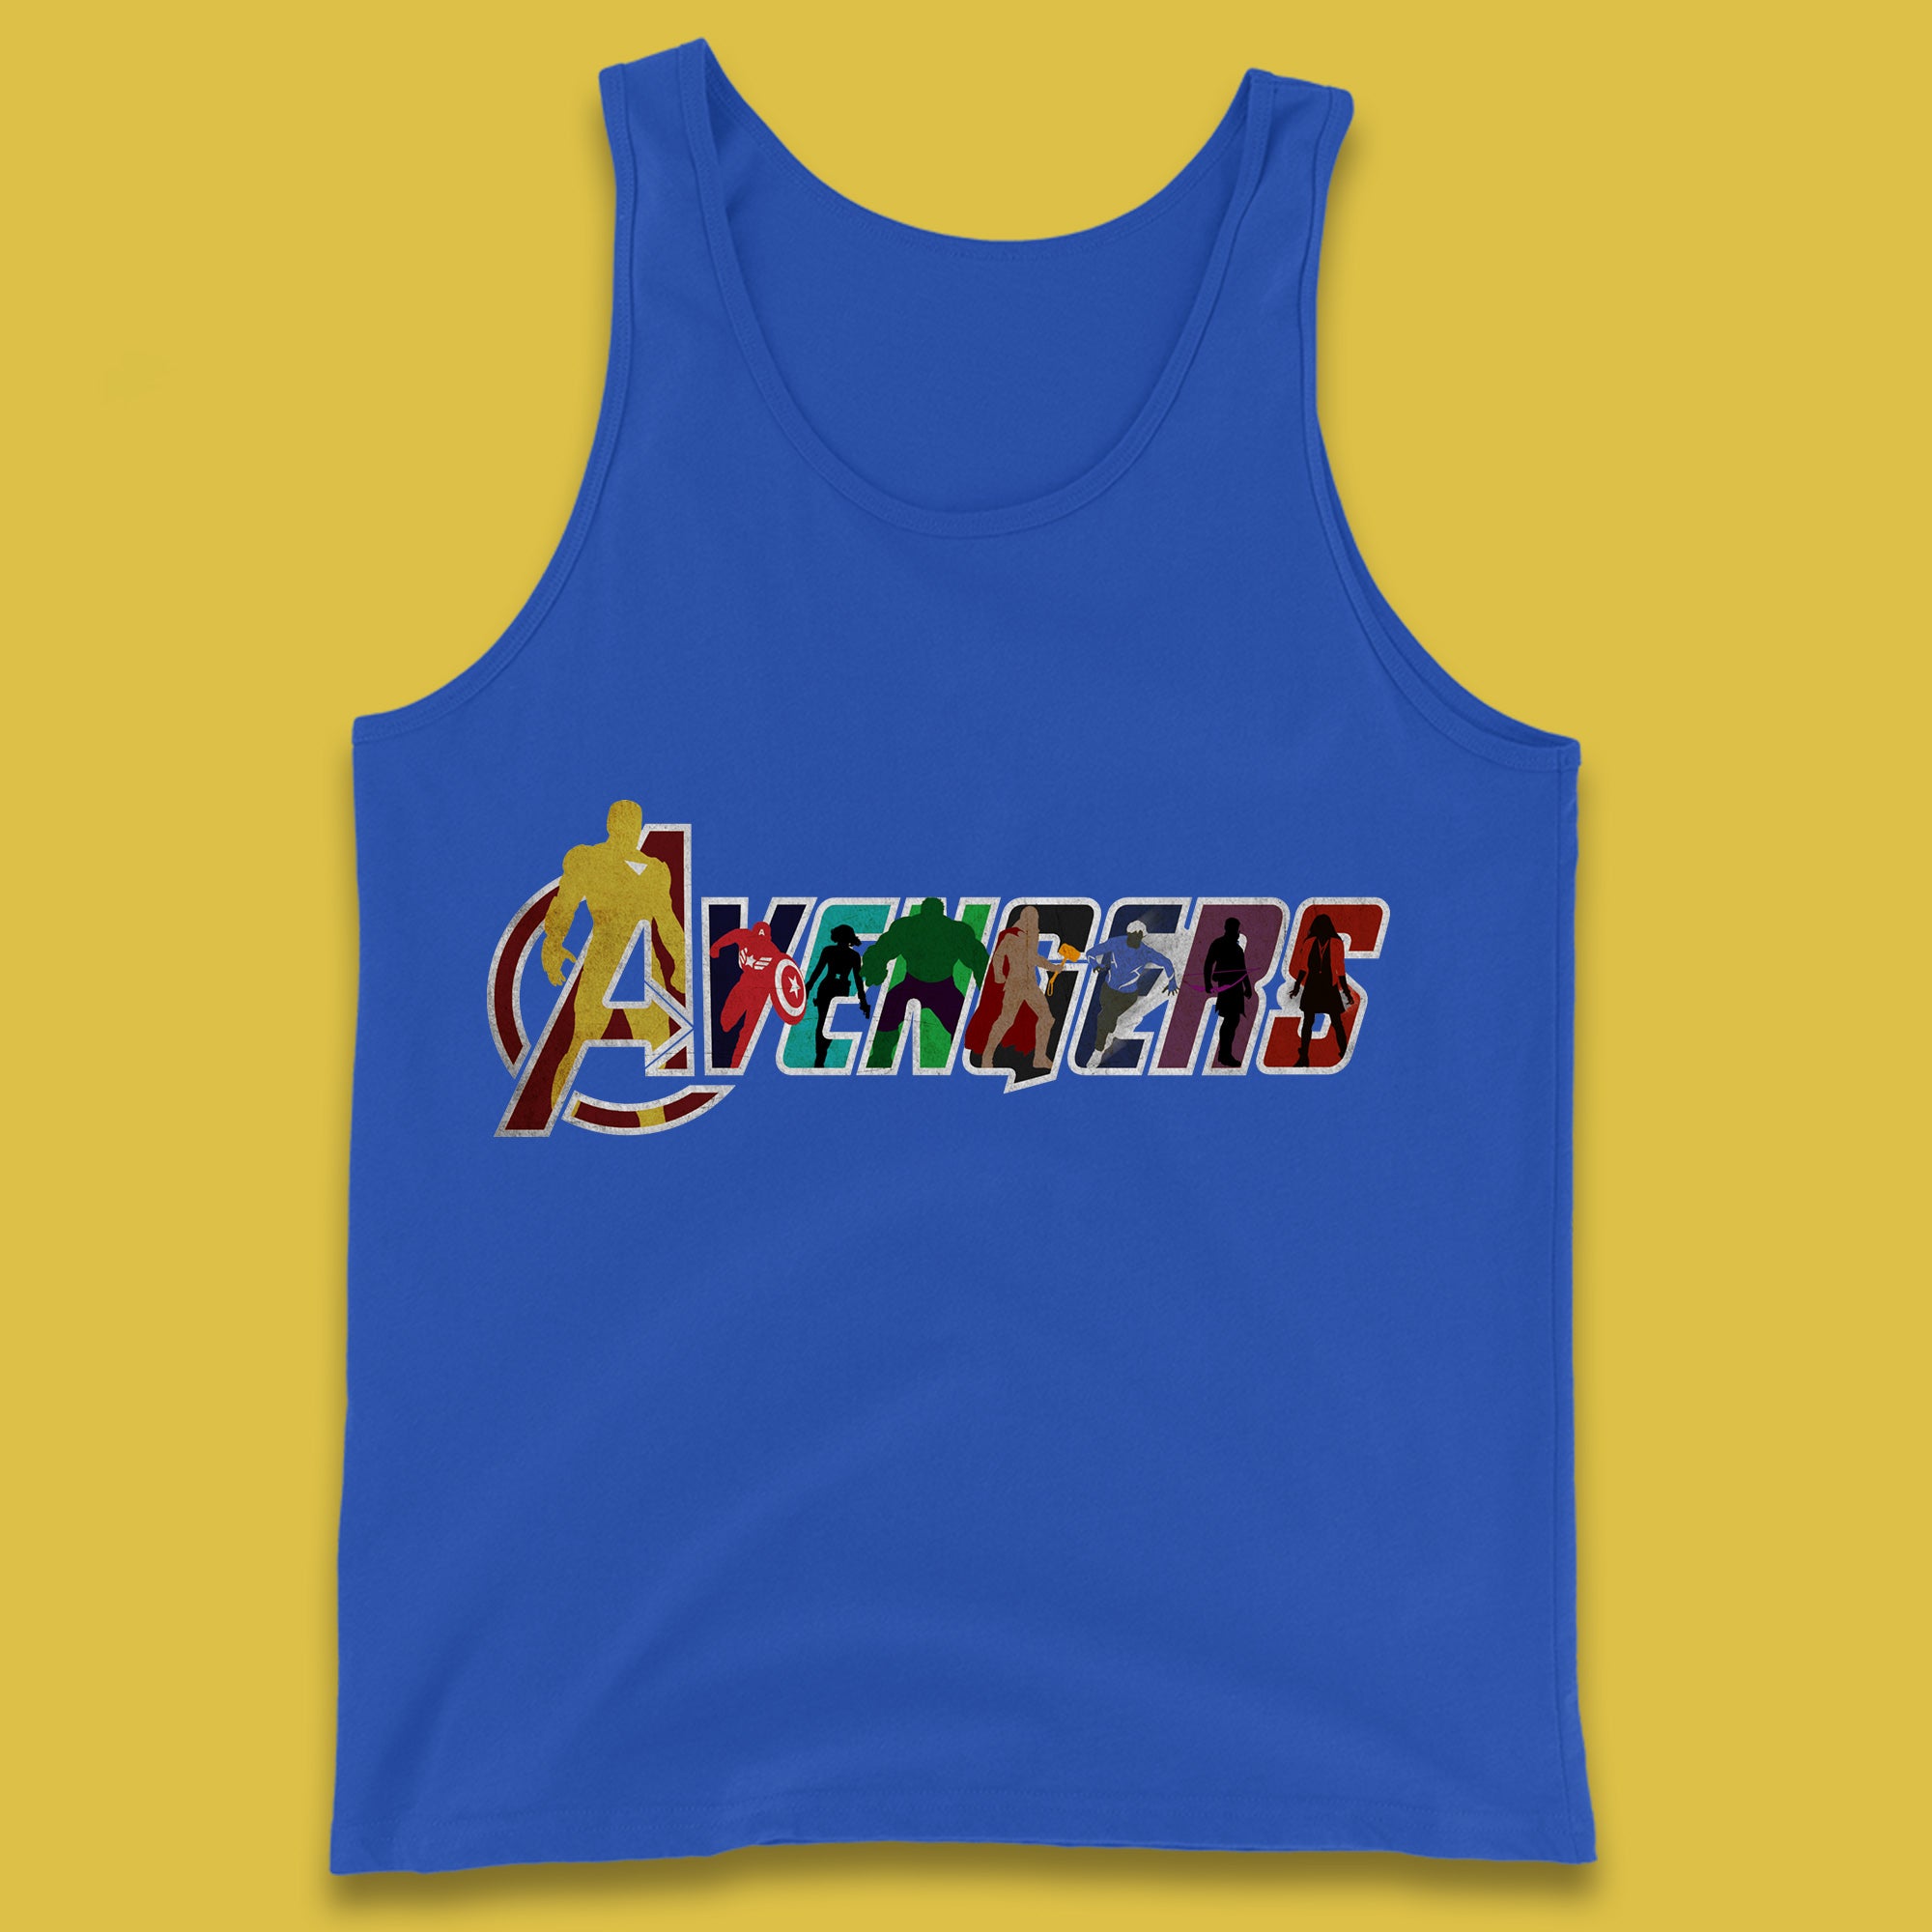 Marvel Avengers Super Heroes Movie Characters Spider Man, Hulk, Iron Man, Thor, Captain America Avengers Group Tank Top